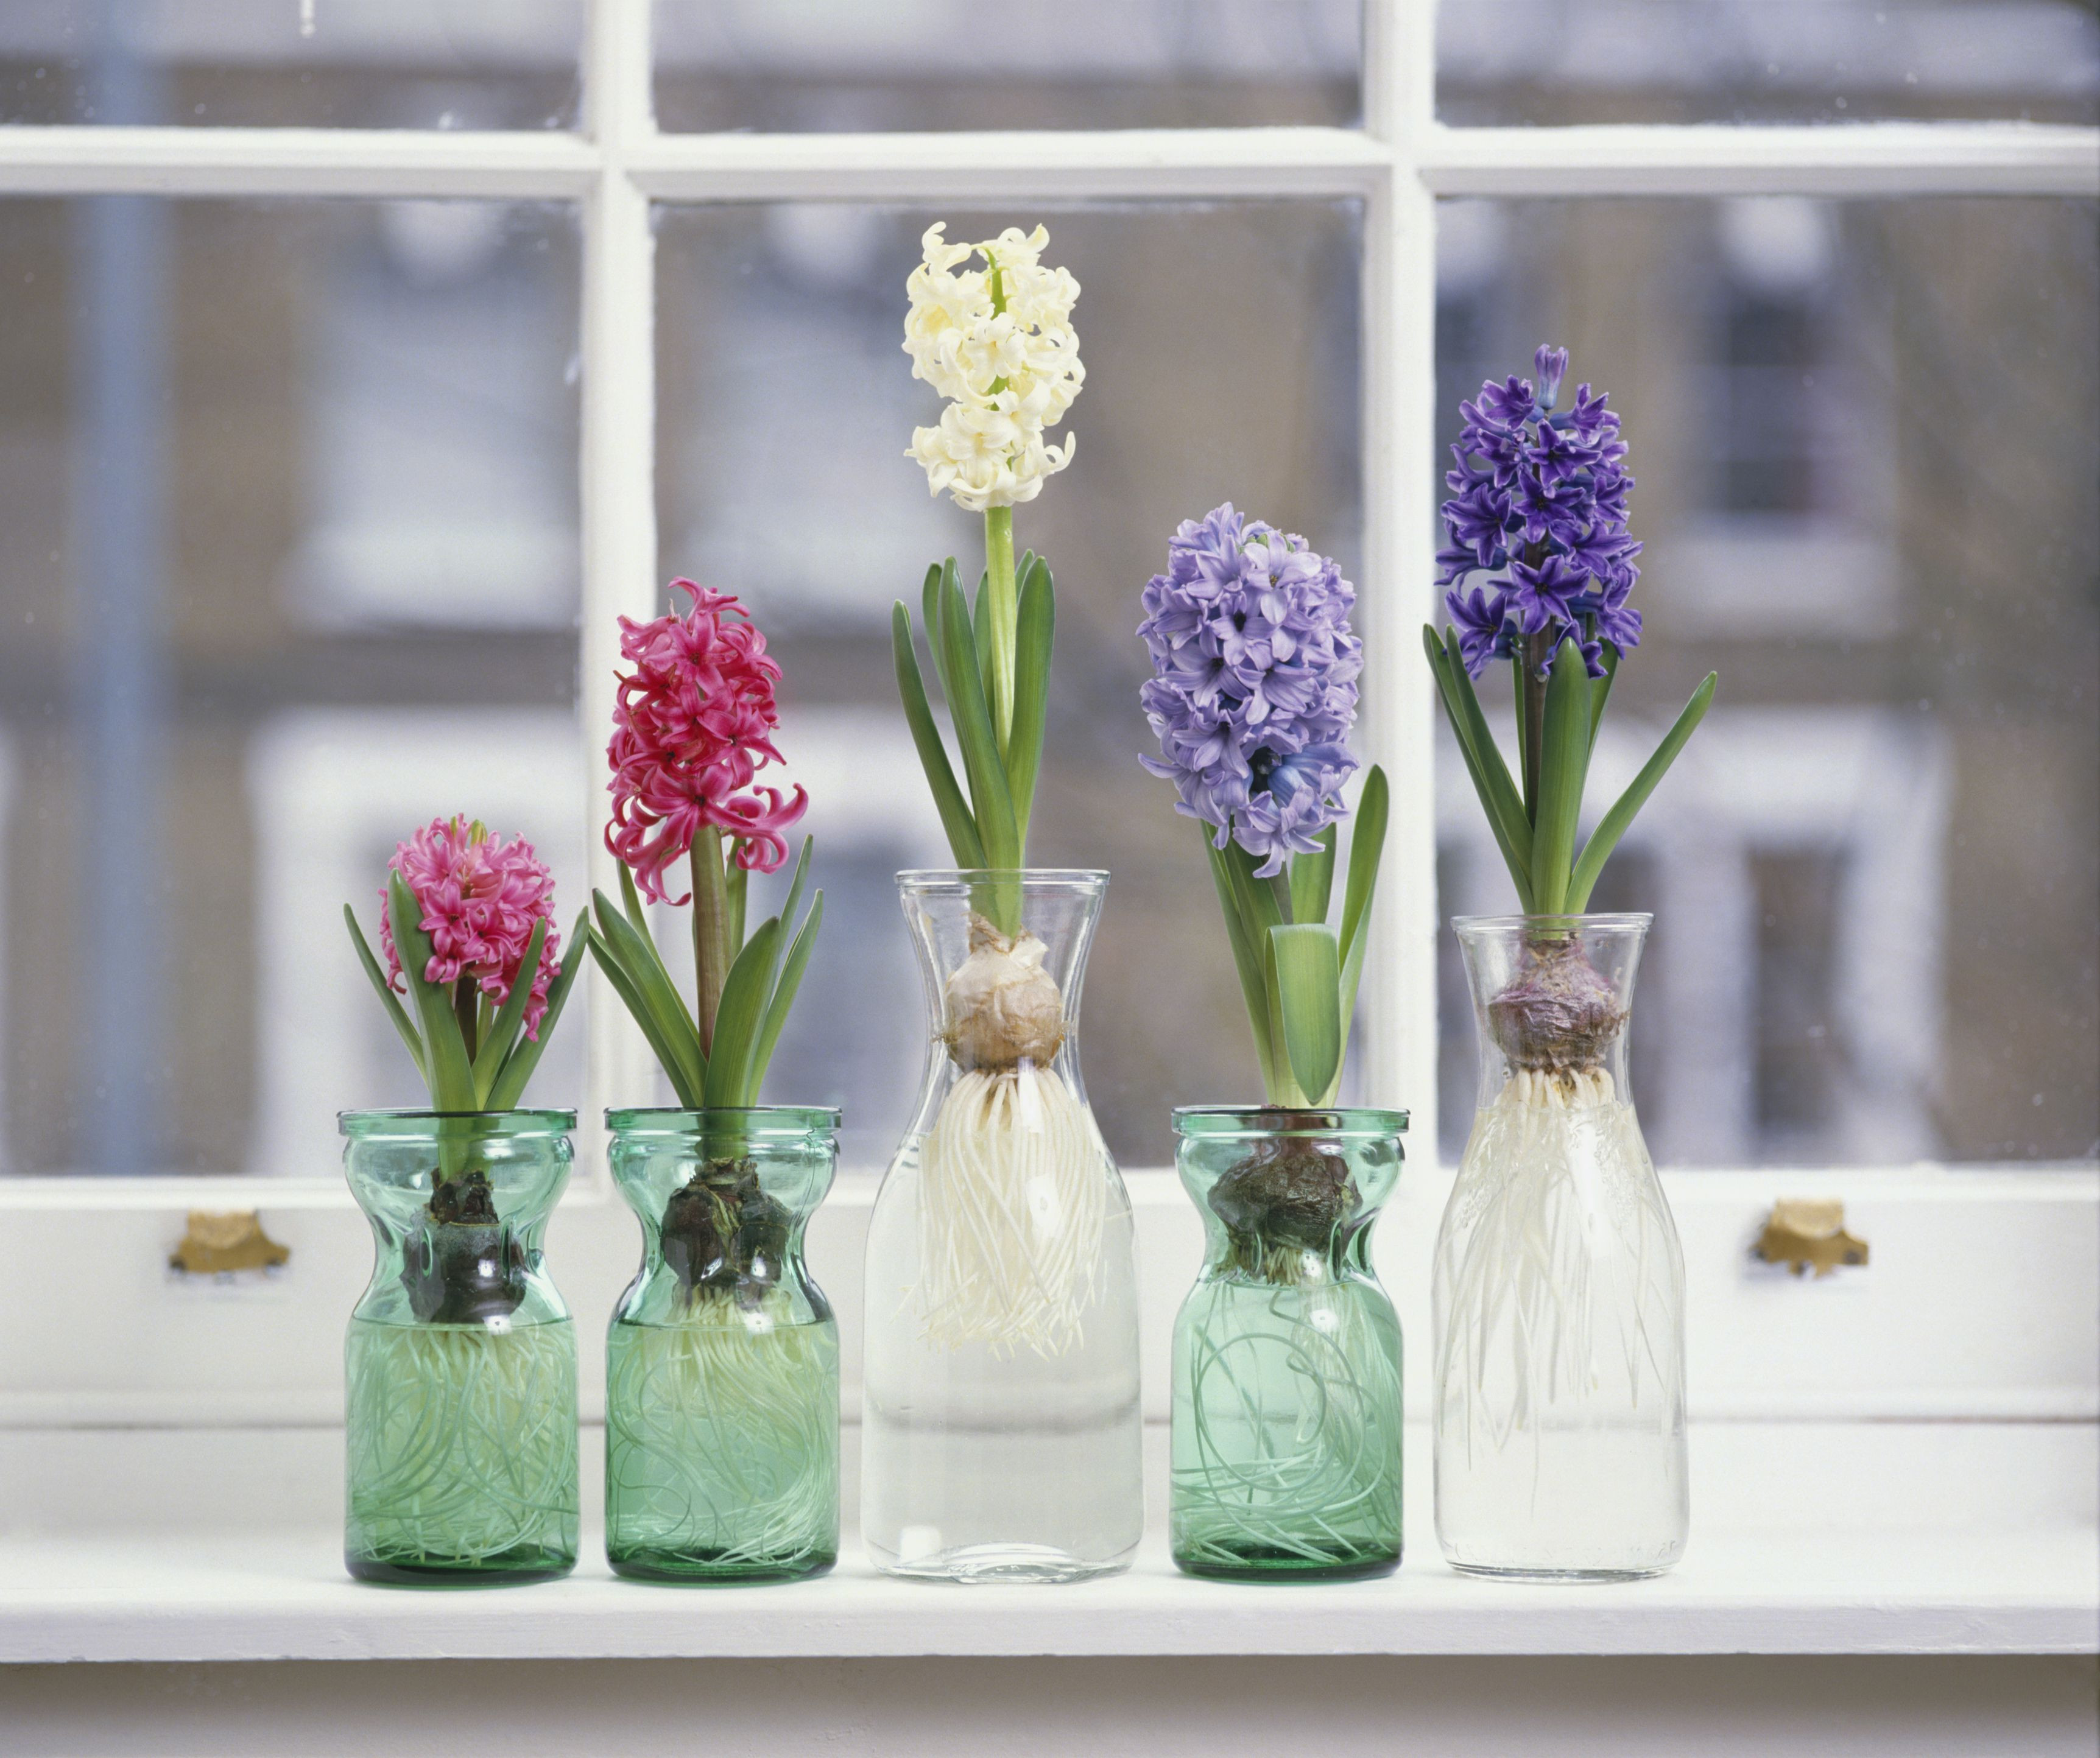 28 Fabulous Glass Light Bulb Vase 2024 free download glass light bulb vase of how to grow hyacinth flowers indoors throughout pink white and purple hyacinthus plants with bulbs in glass jars on window sill 125157739 57c5b8f73df78cc16ead76eb